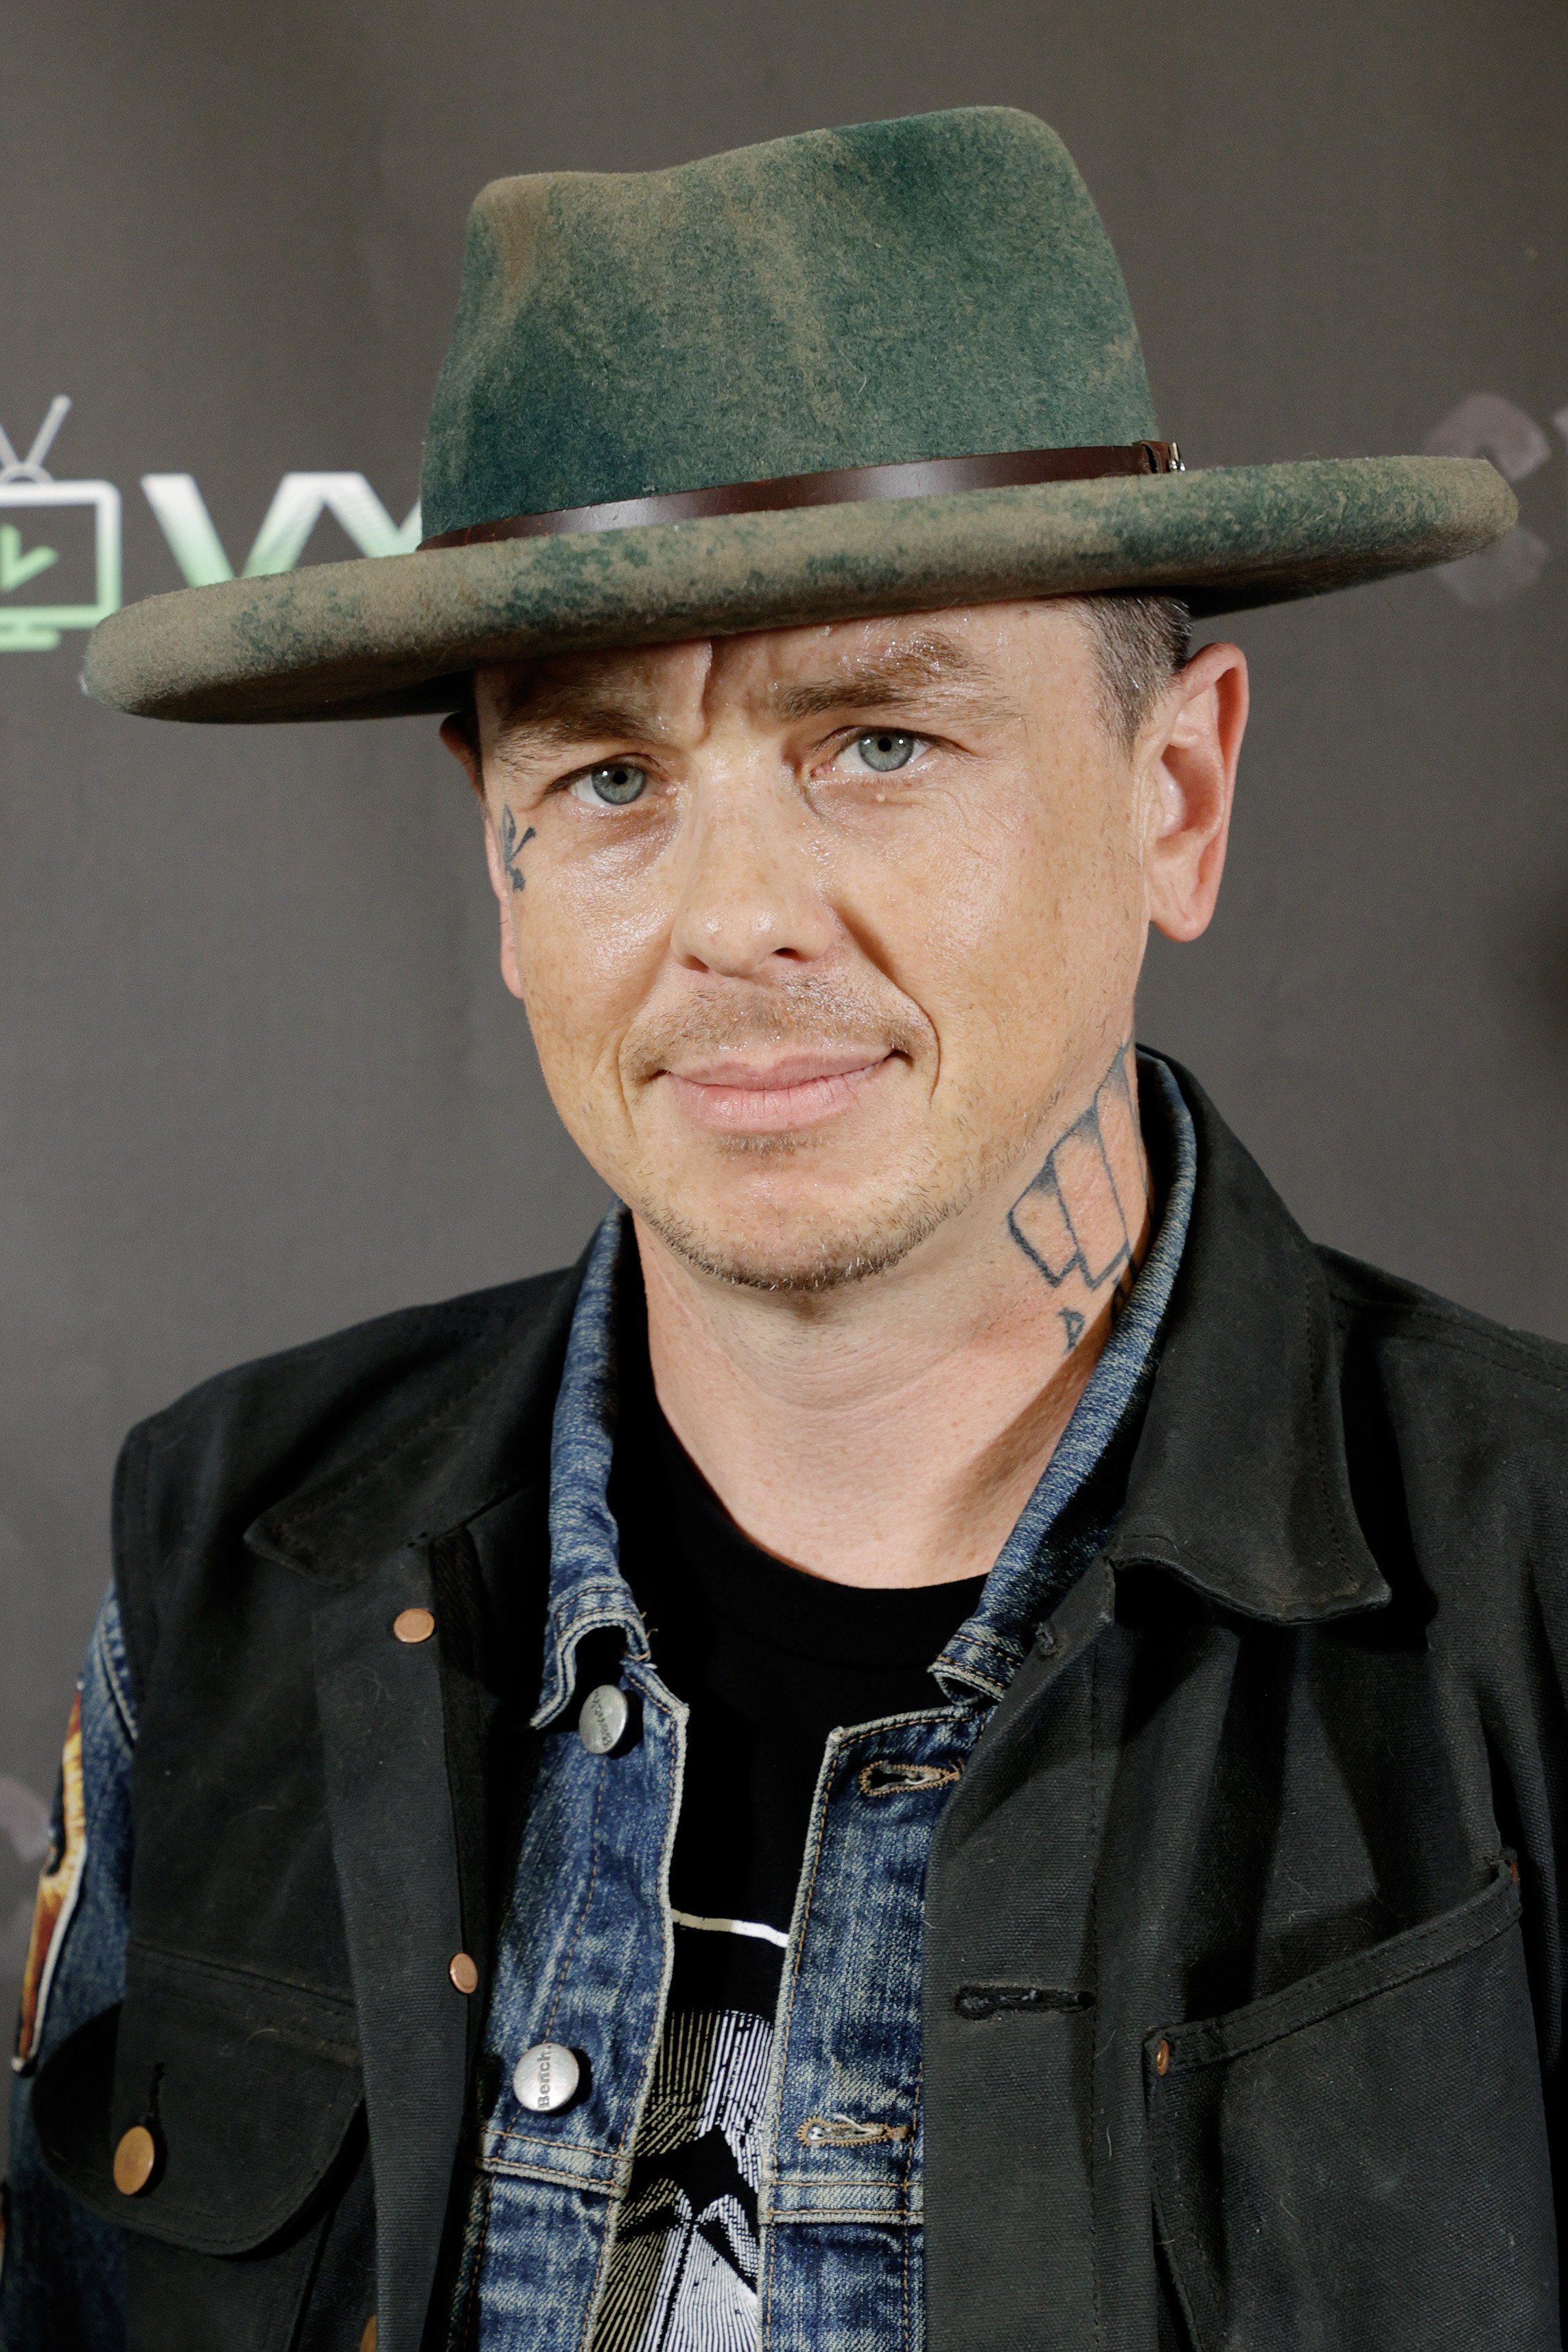 DJ Sid Wilson attends the red carpet premiere of "Cracka" at Arena Cine Sunset Lounge on June 17, 2021 in Los Angeles, California ┃Source: Getty Images